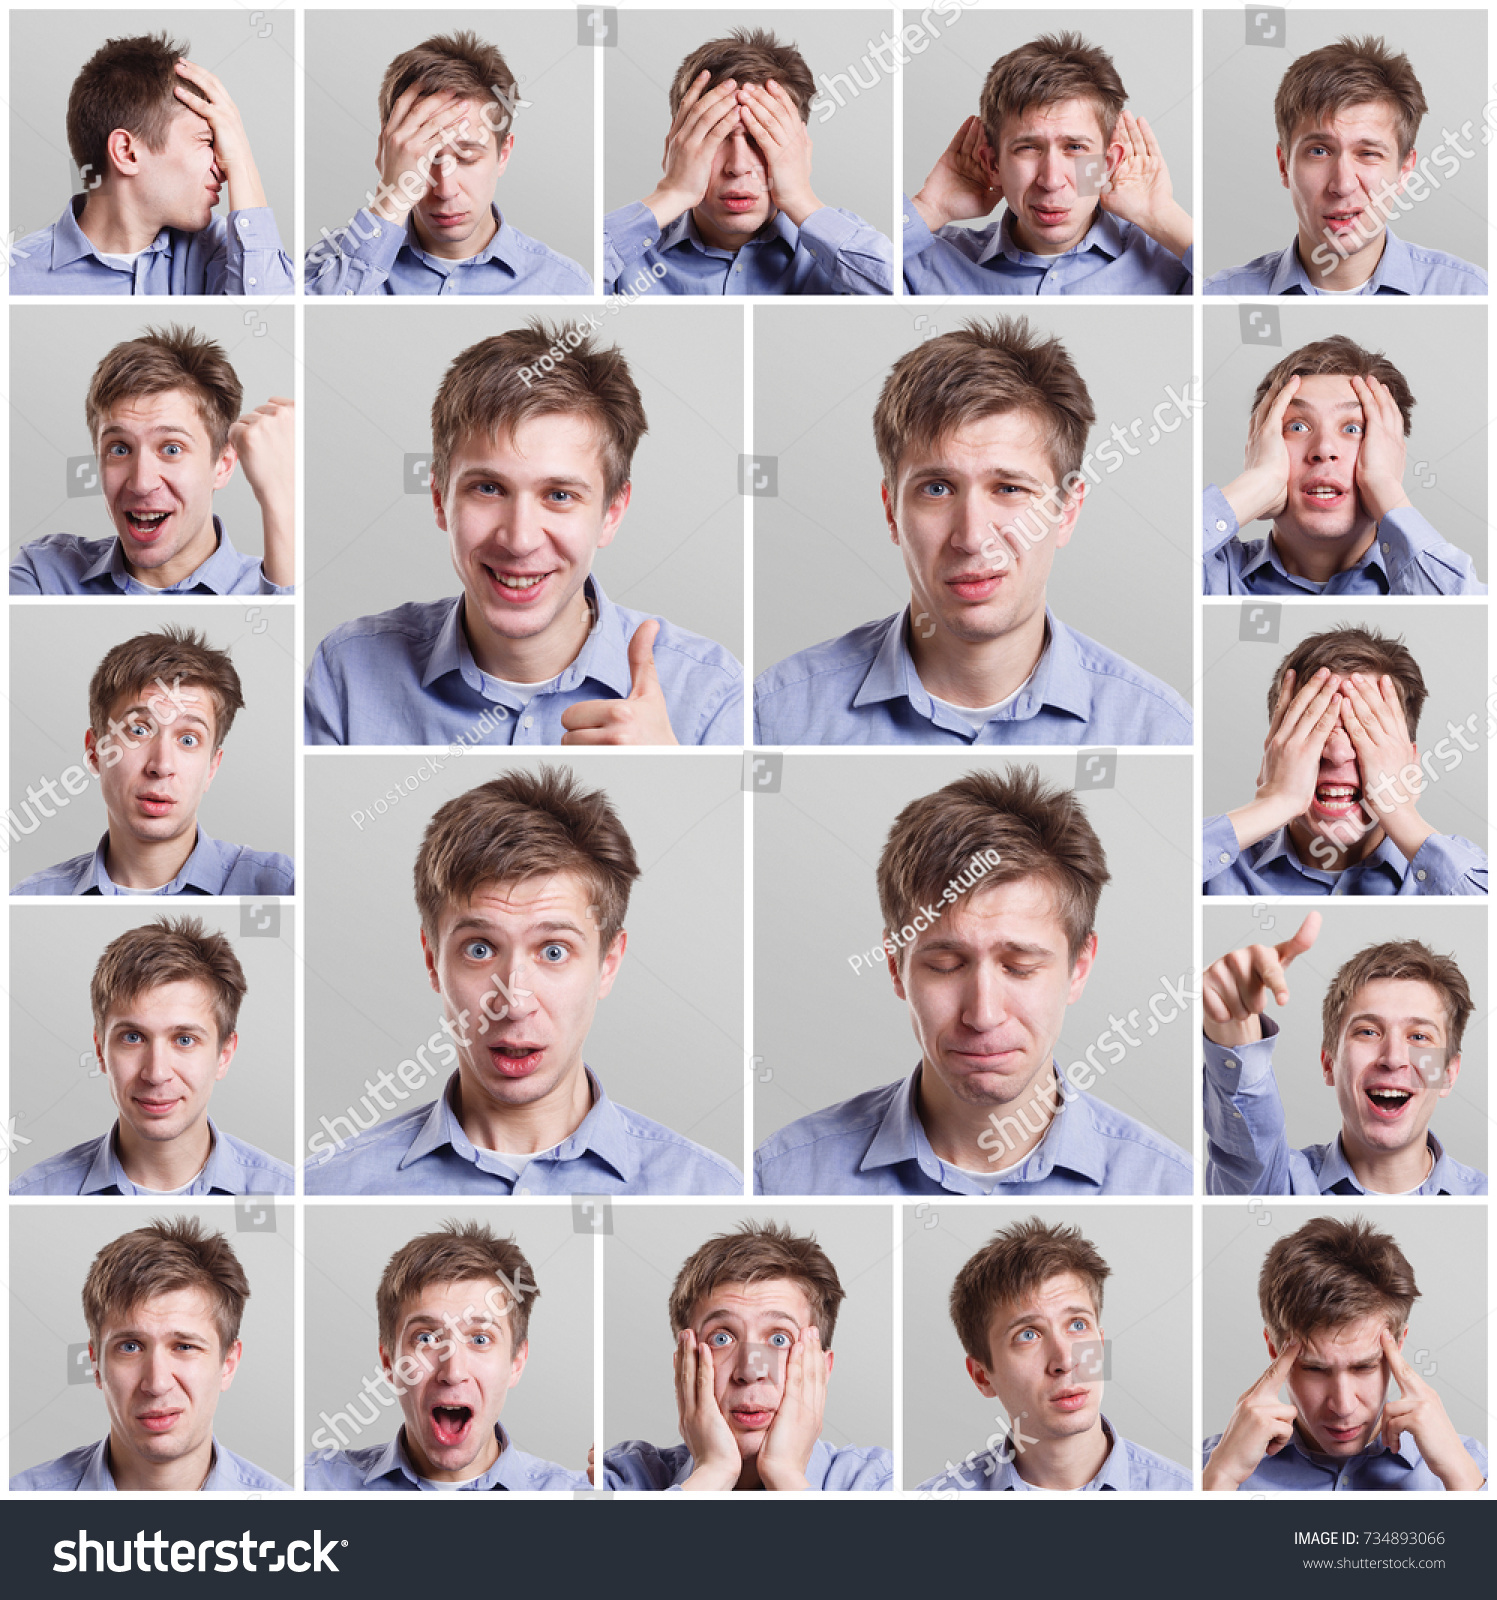 Mosaic of young man expressing different emotions and gesturing at gray studio background. Happy, surprised, skeptical and pensive facial expression #734893066